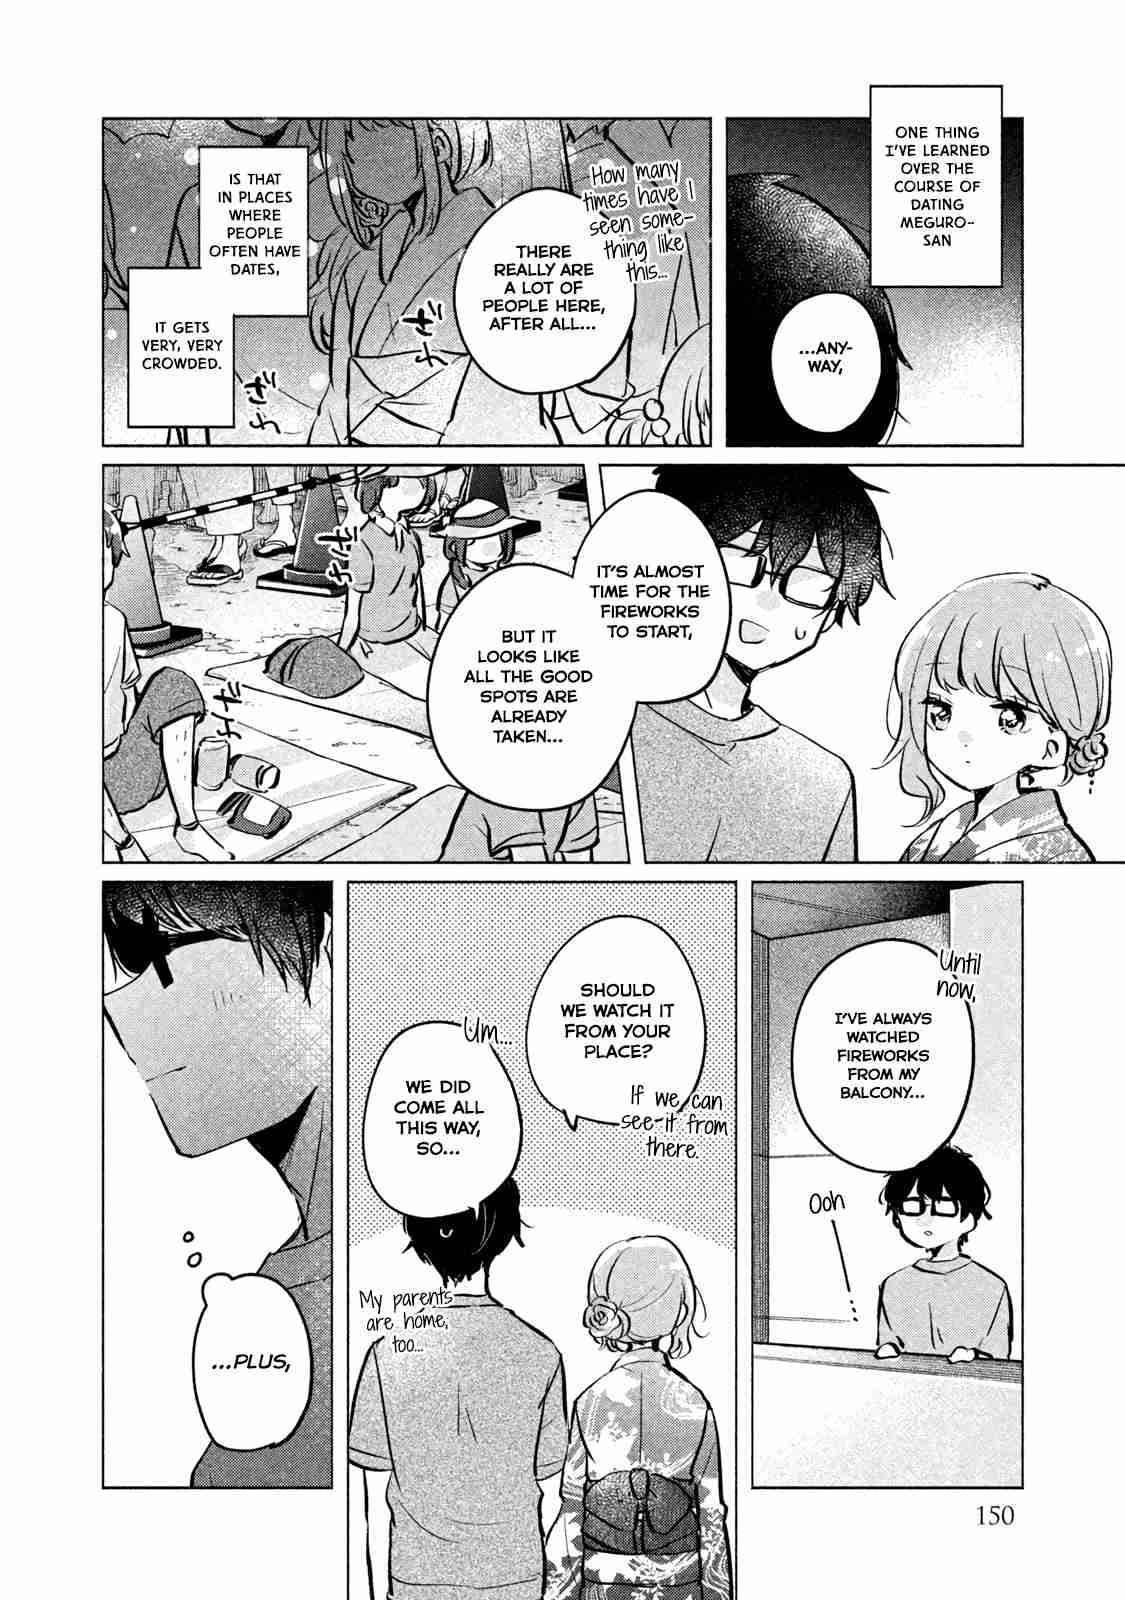 It's Not Meguro san's First Time Vol. 1 Ch. 10 That's What You Call Love